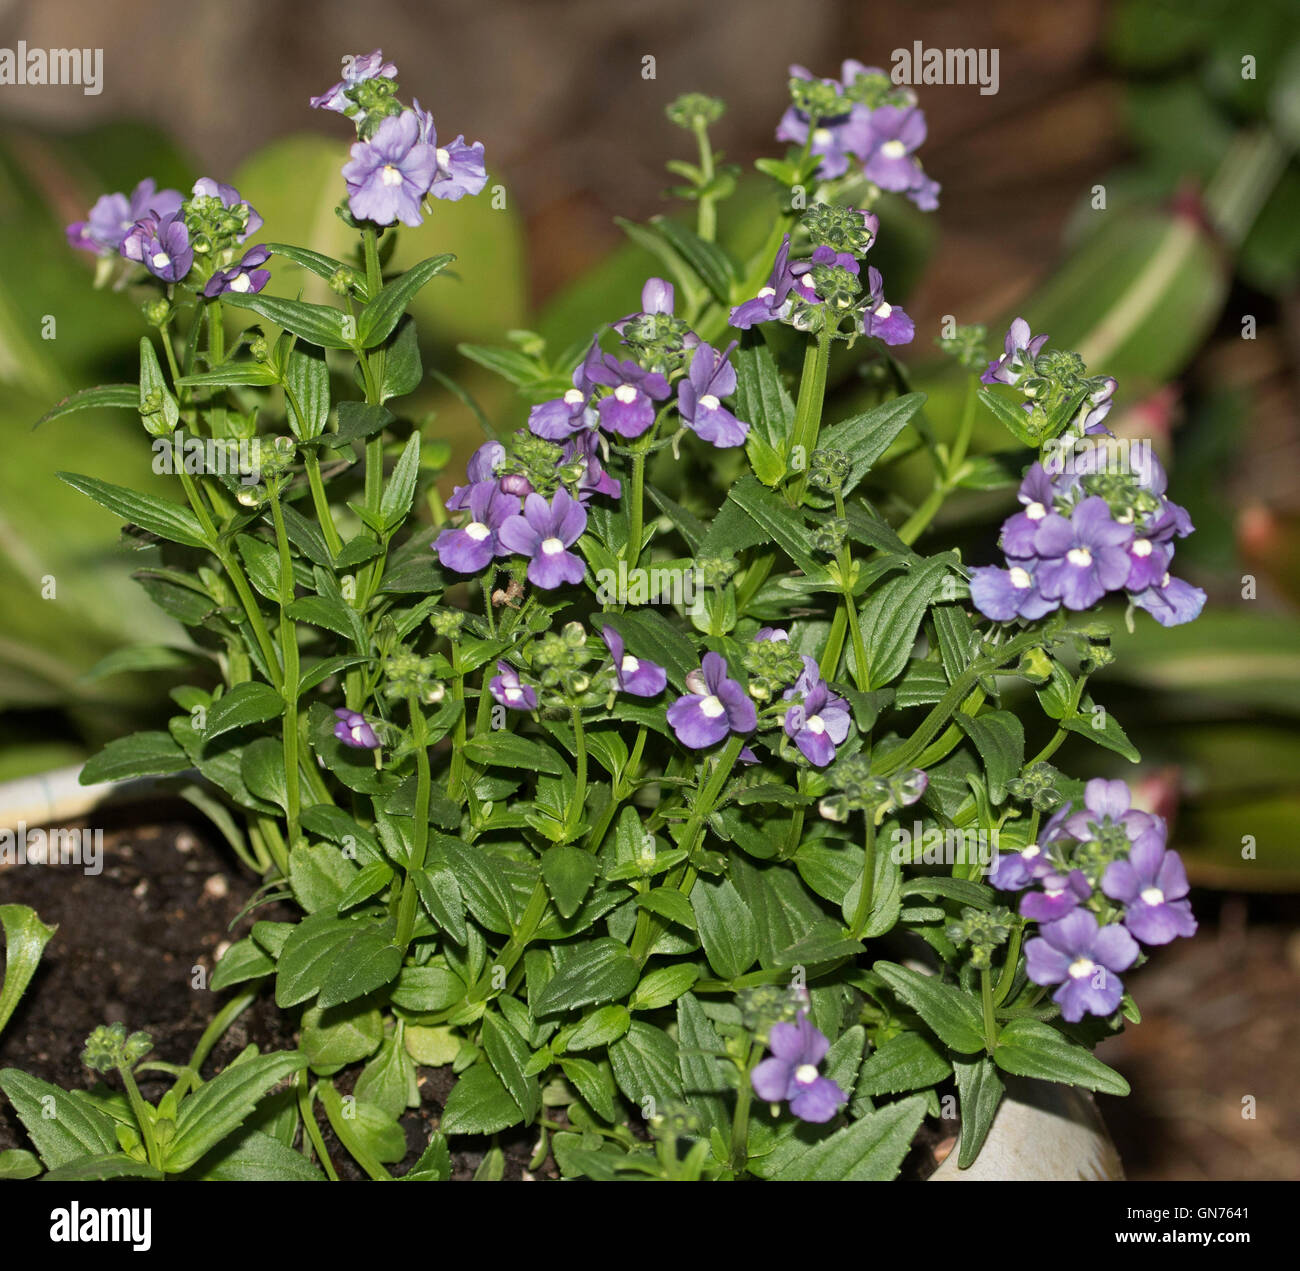 Large cluster of vivid purple Nemesia flowers with white  throats & emerald green leaves on dark background Stock Photo